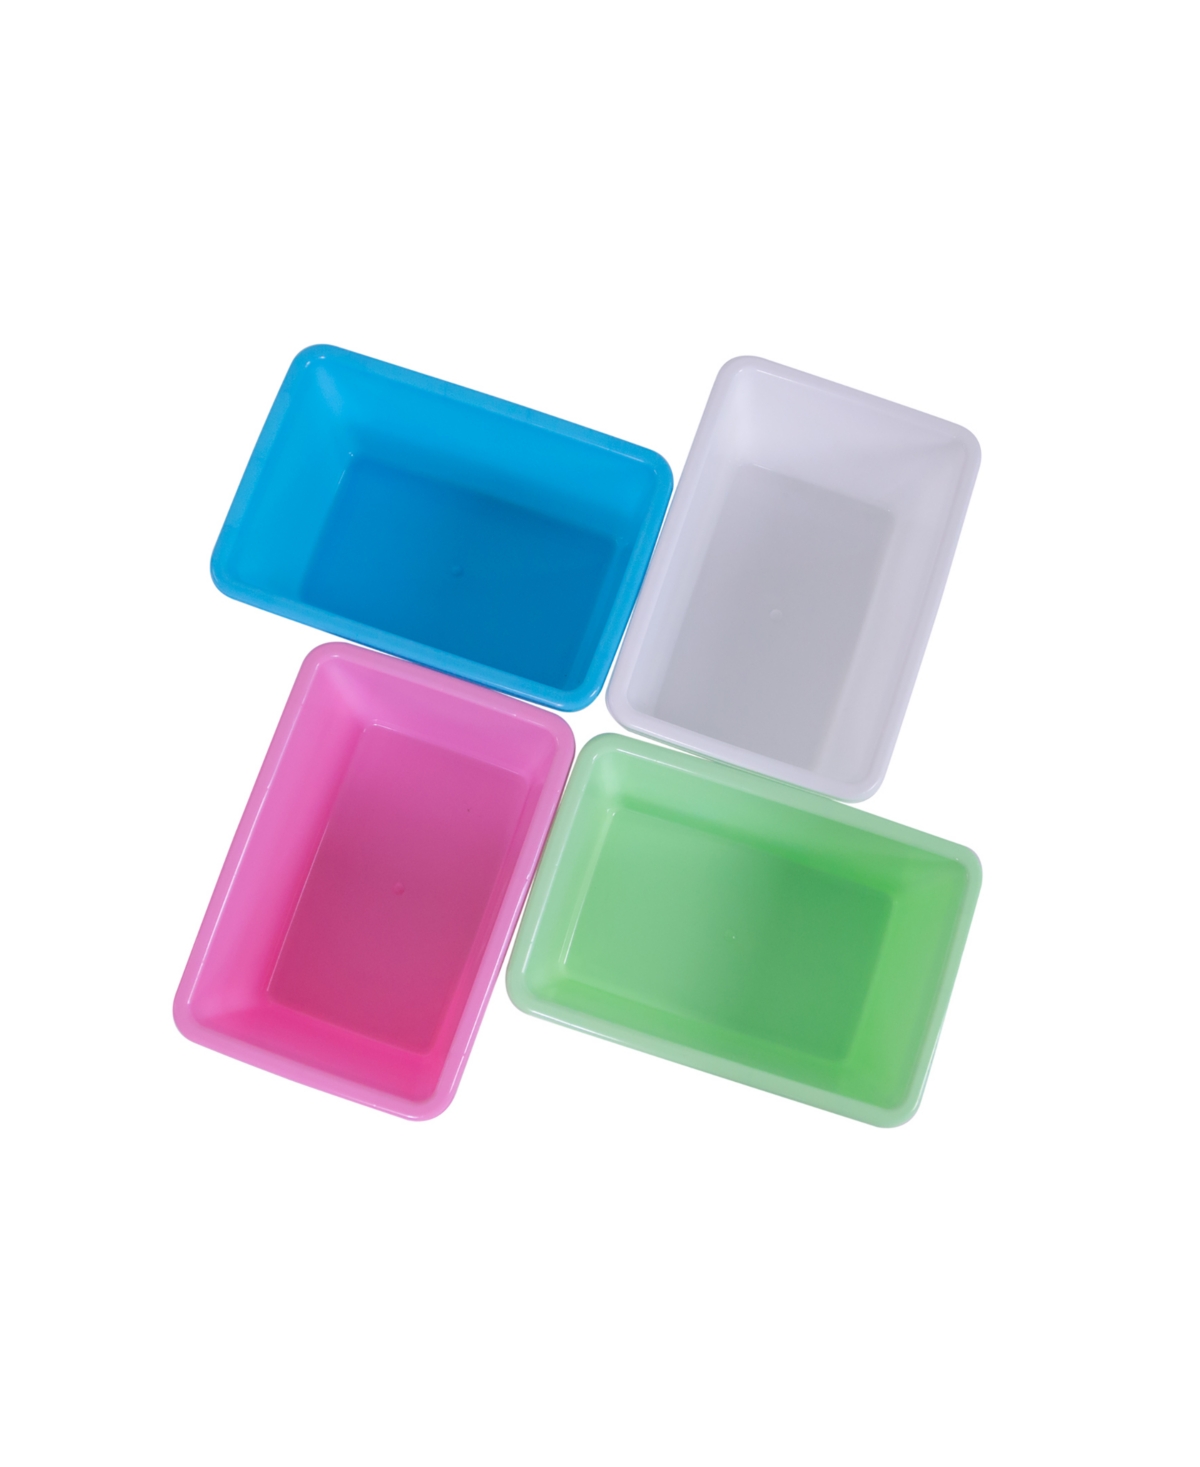 Uniplay Toy Organizer Bins, Pack Of 4 In Pink,light Blue,light Green,white